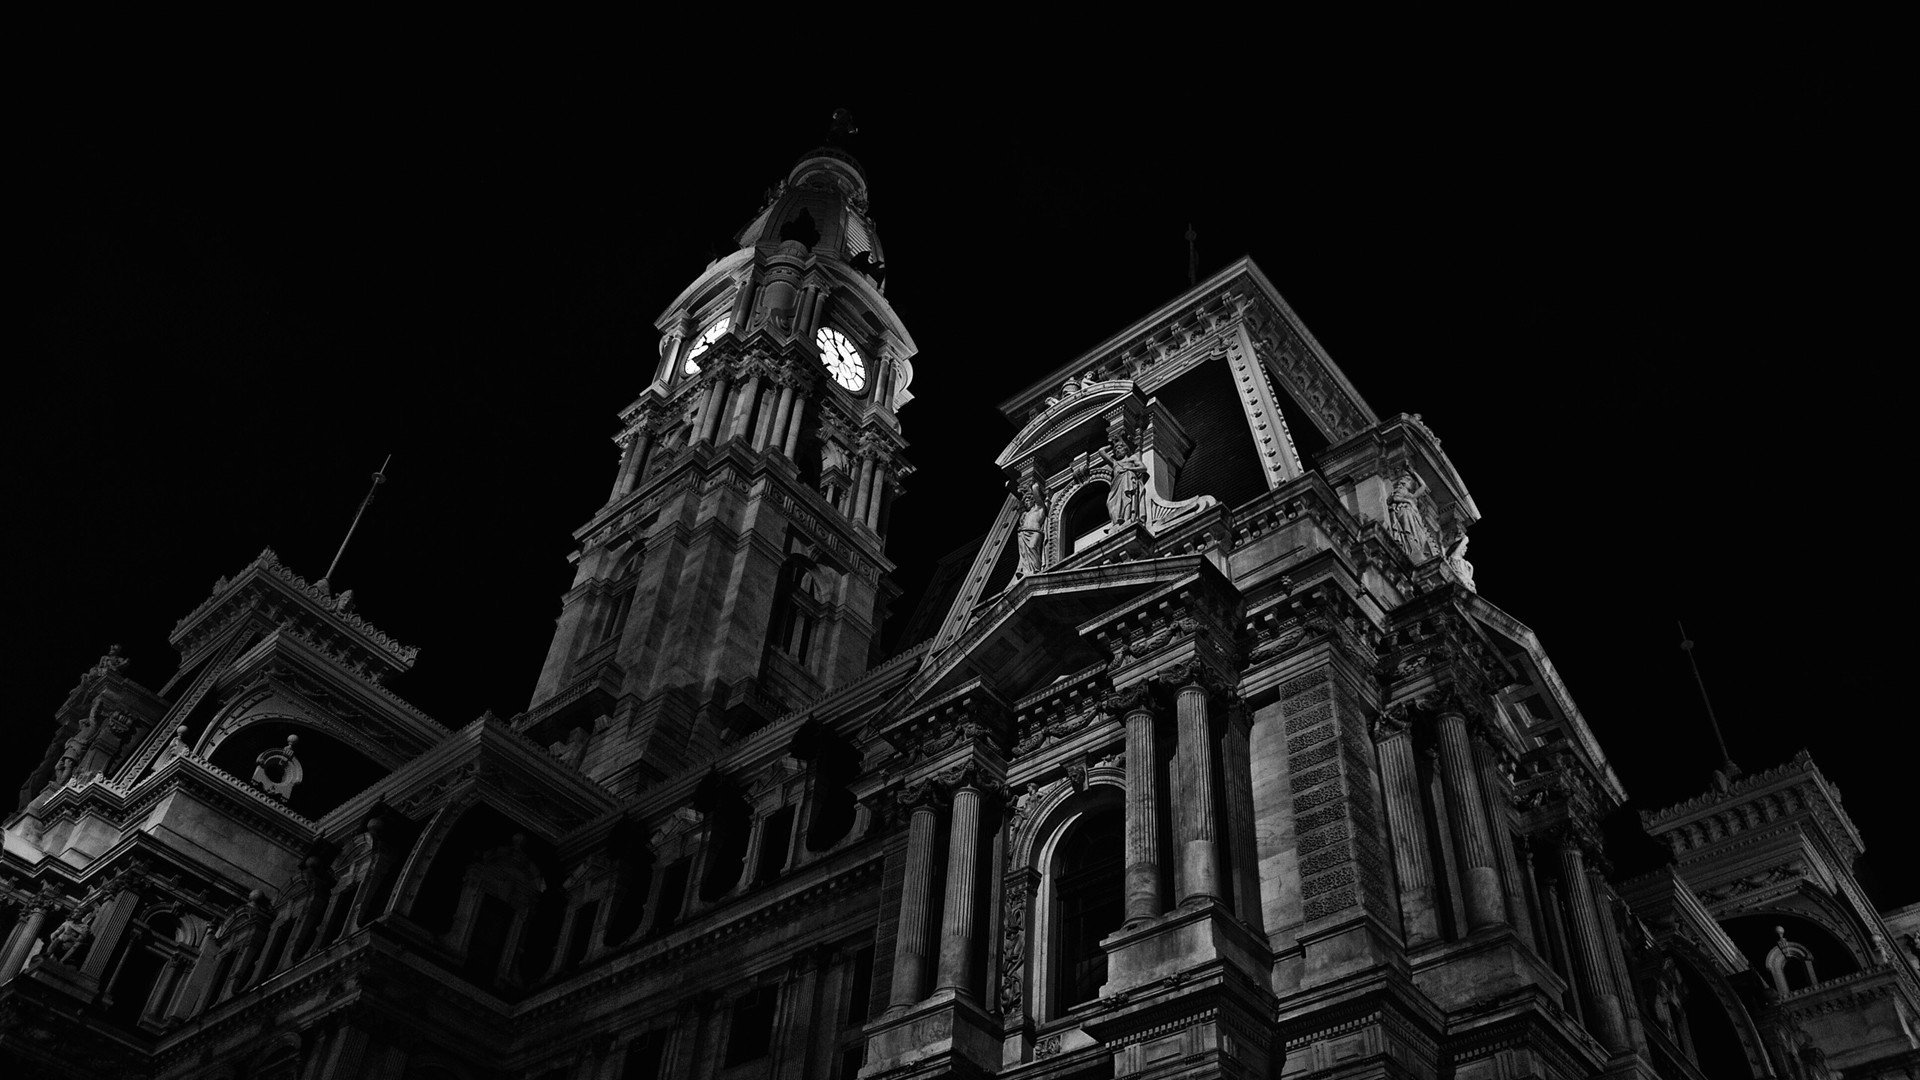 architecture, Worms eye view, Building, Philadelphia, USA, City hall, Old building, Tower, Clock towers, Ancient, Night, Monochrome, Black background Wallpaper